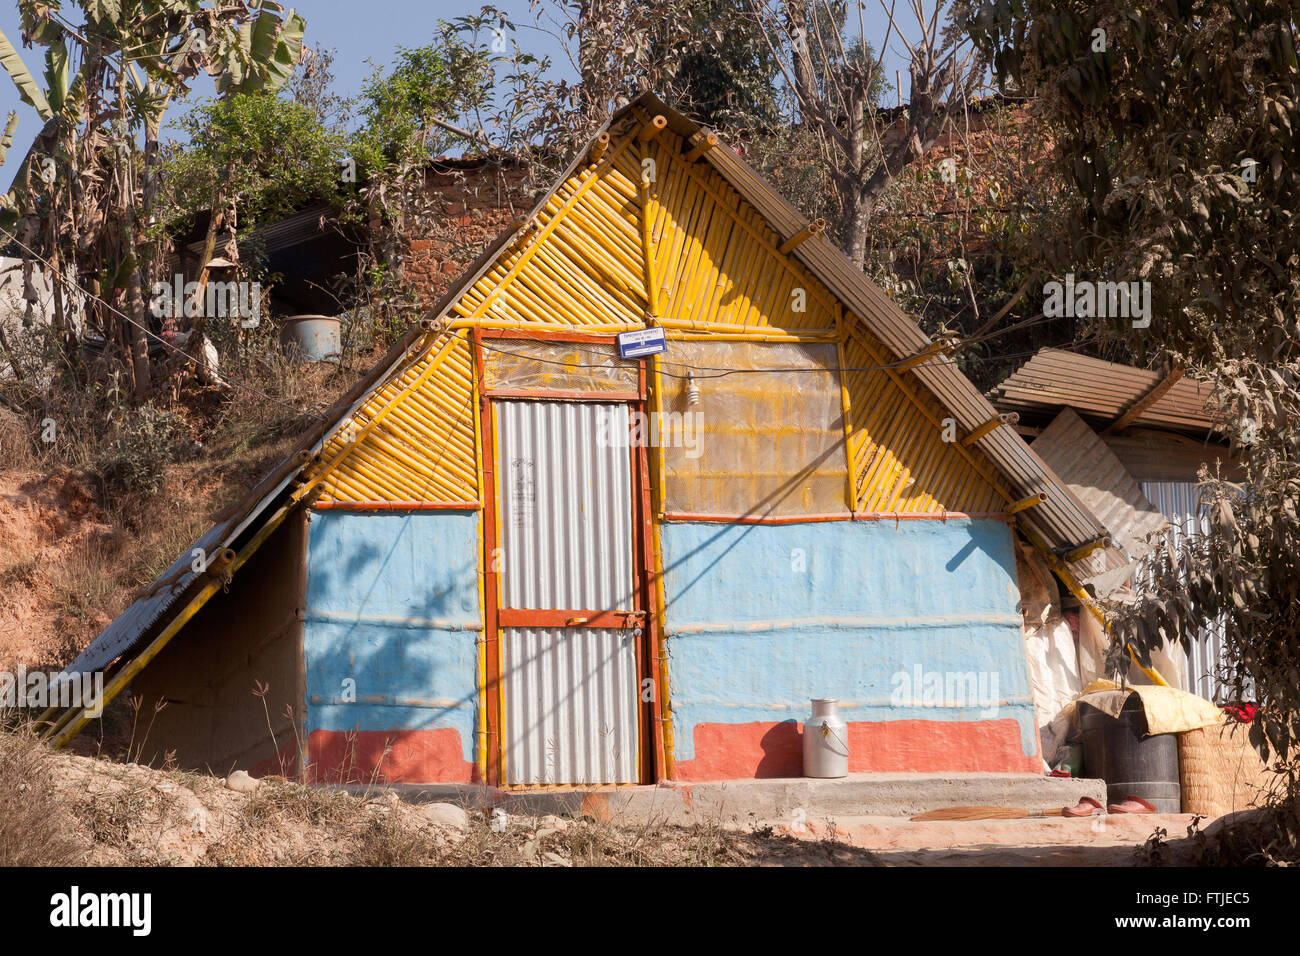 Transitional shelter built by the Chaudry Foundation, nr Phataksila, Nepal Stock Photo